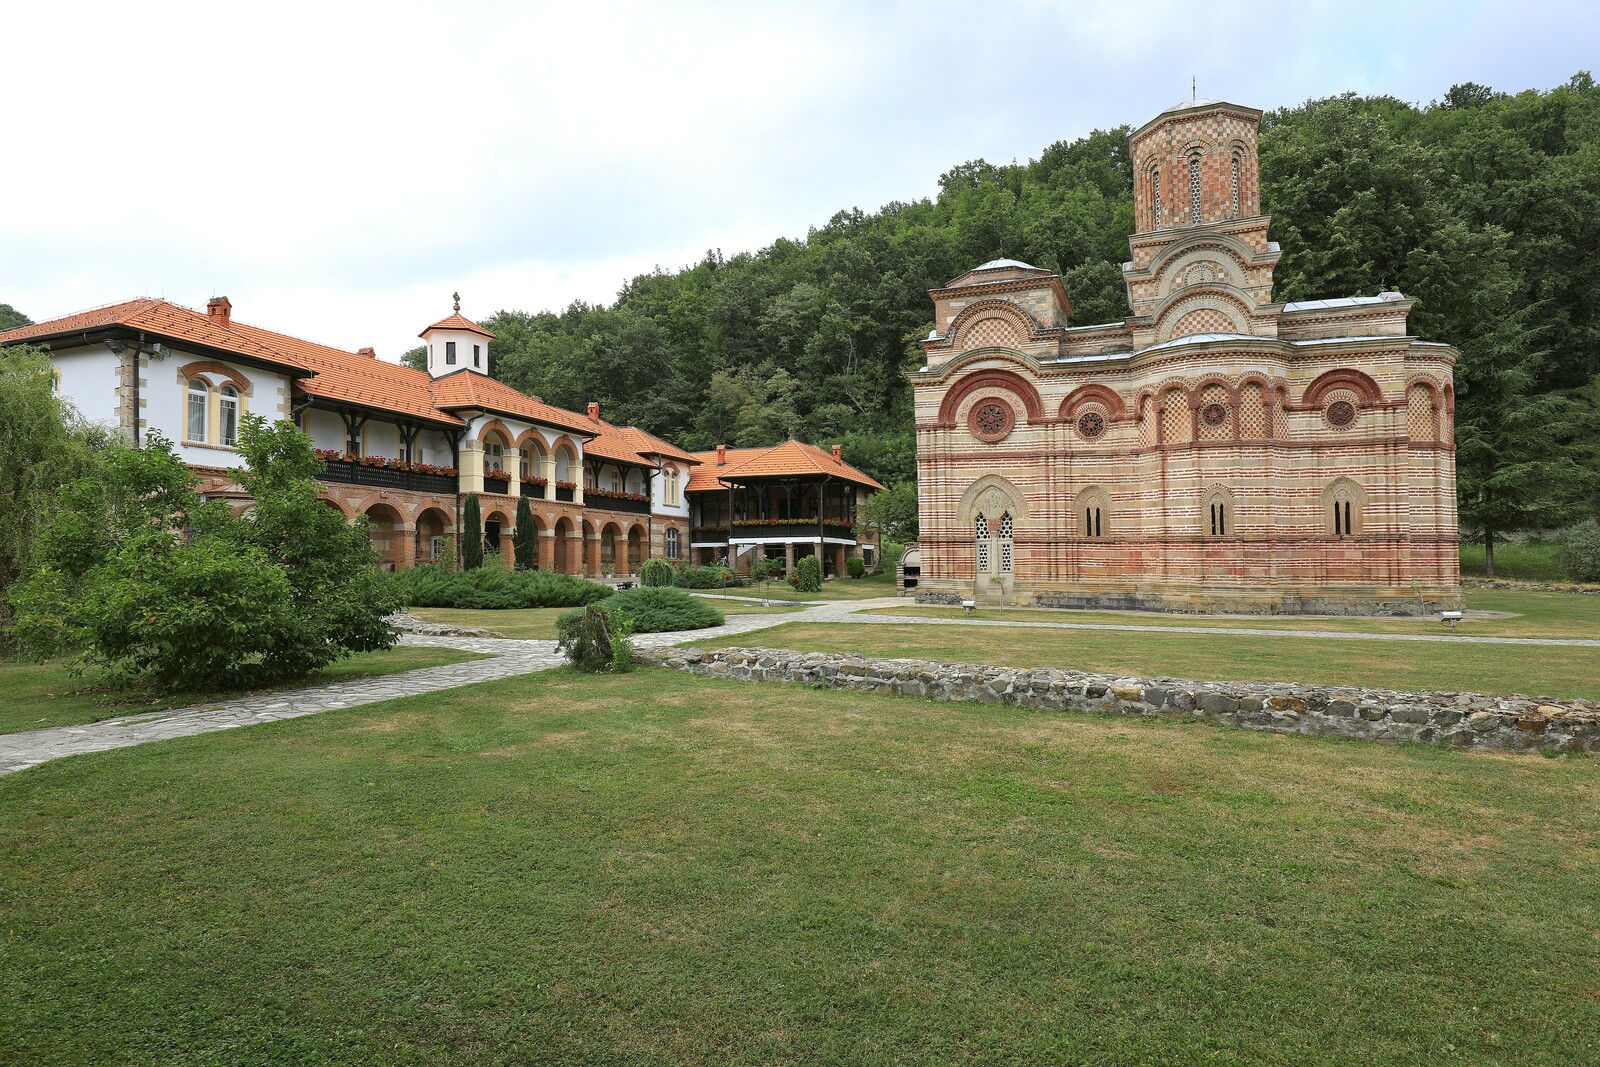 Church and Dormitory